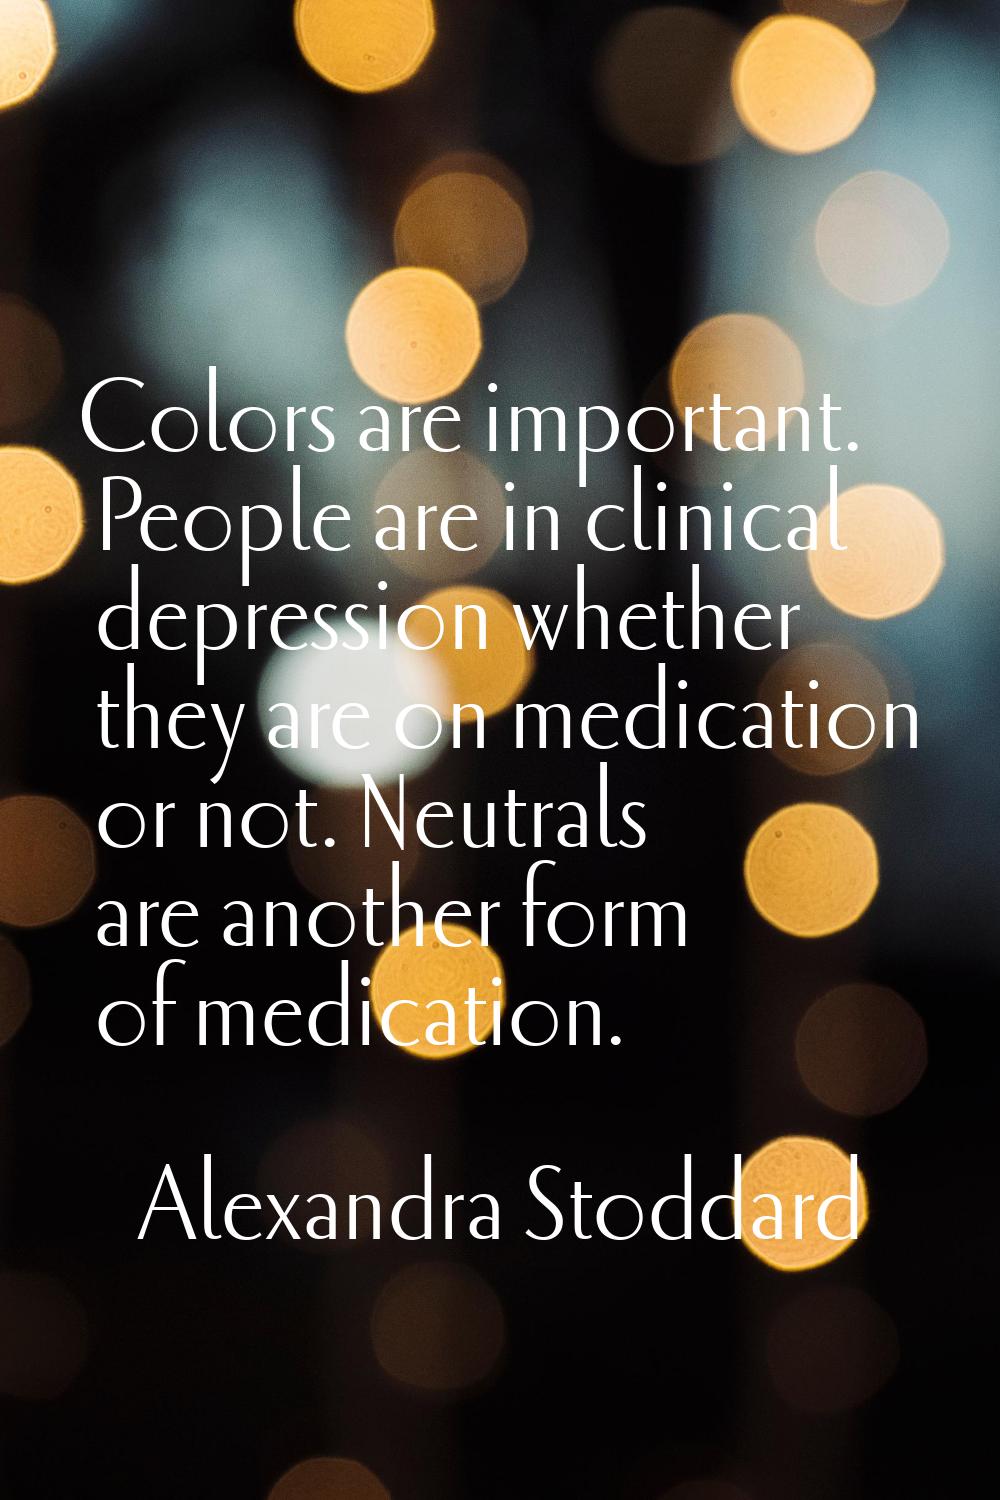 Colors are important. People are in clinical depression whether they are on medication or not. Neut